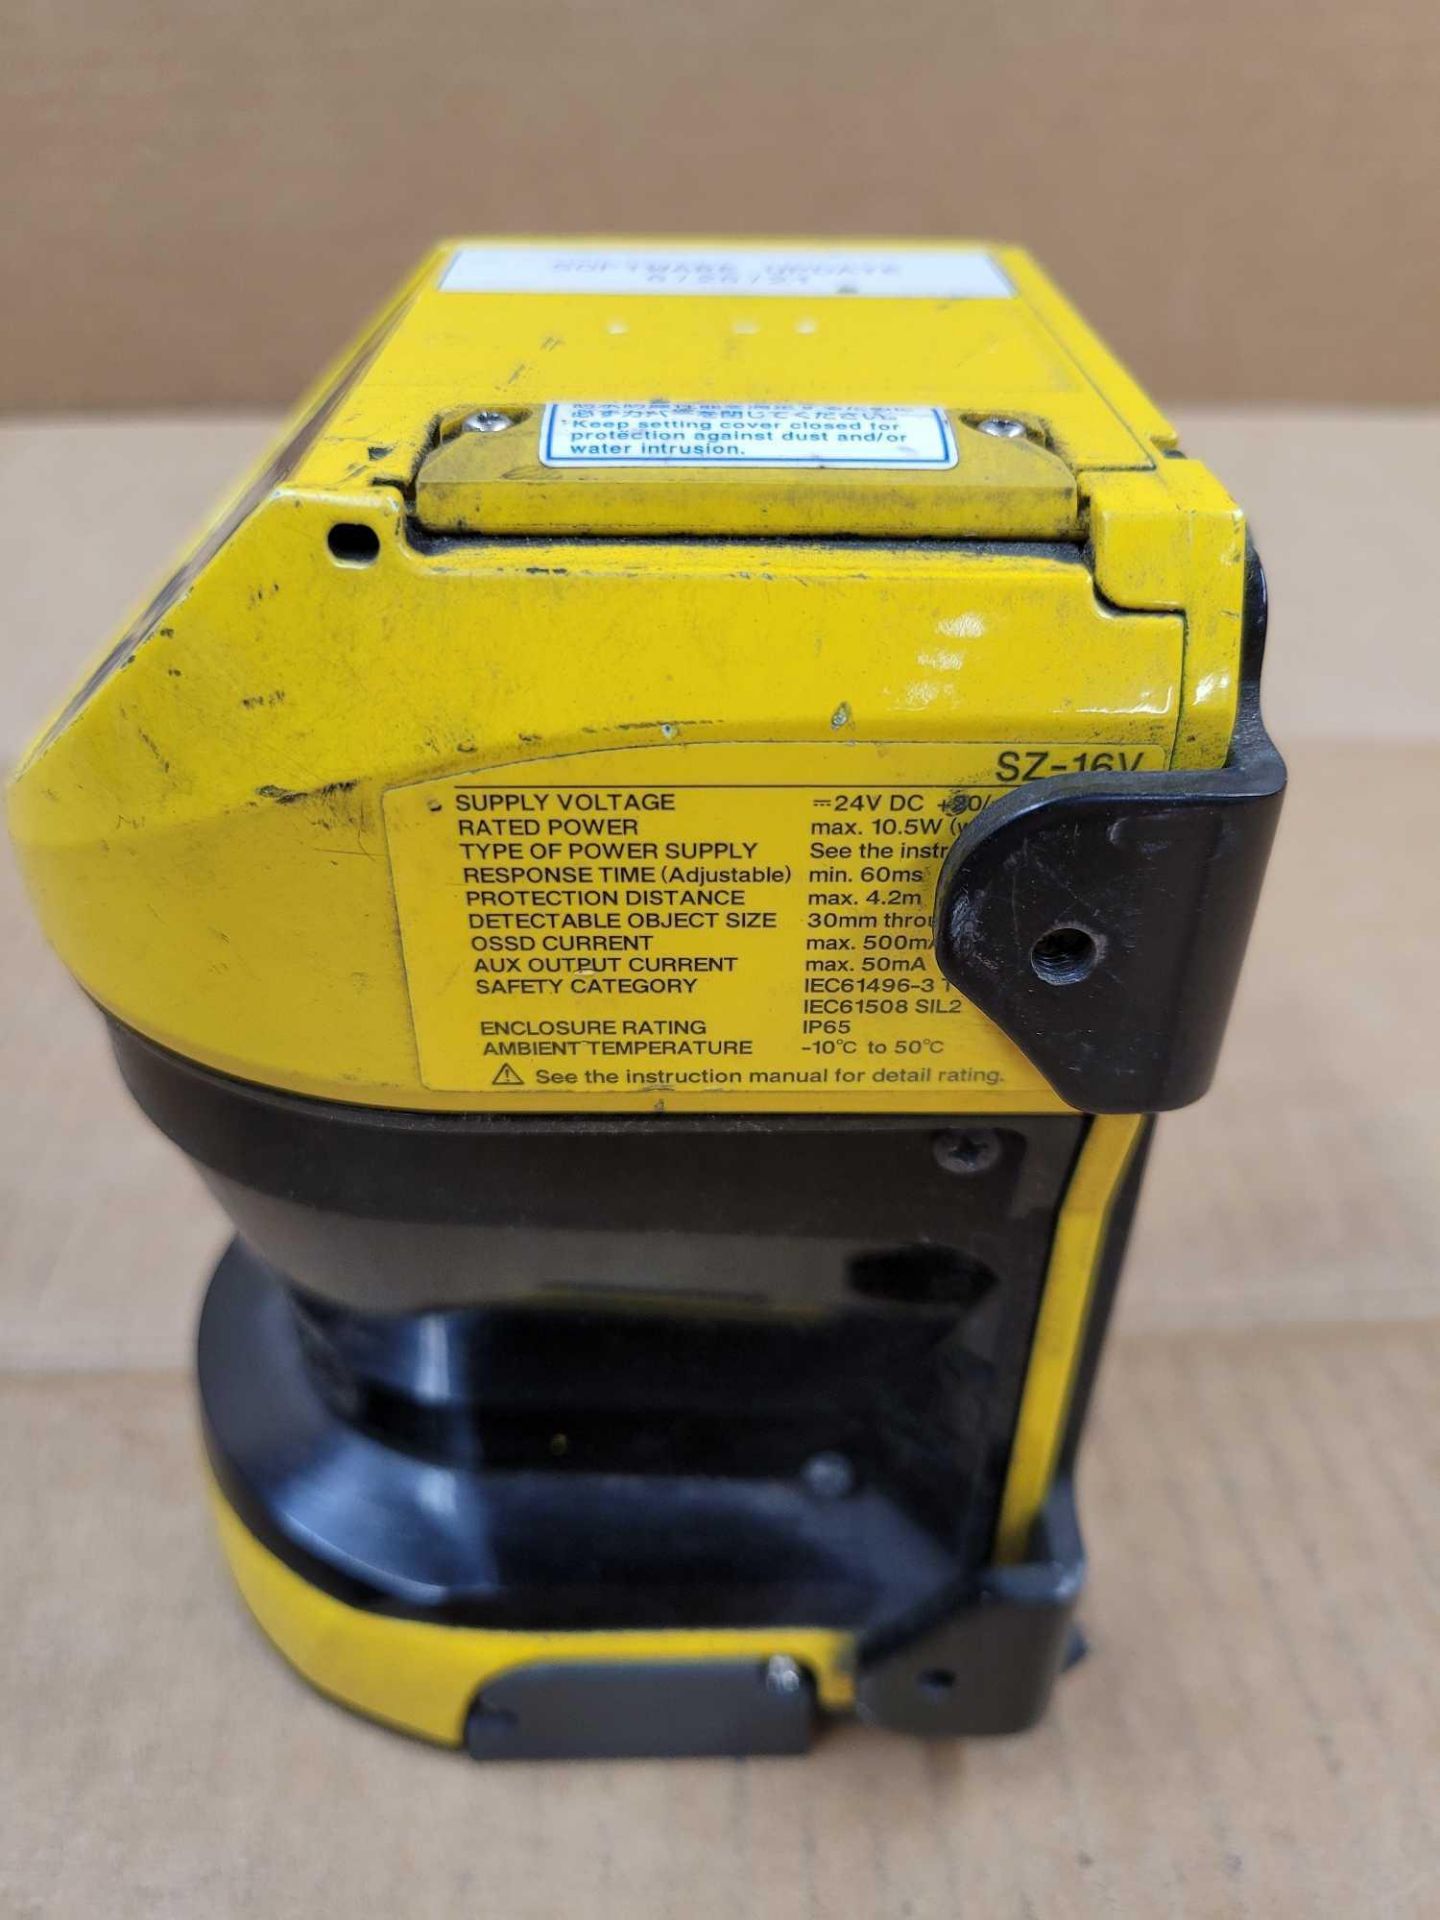 KEYENCE SZ-16V / Safety Laser Scanner  /  Lot Weight: 4.2 lbs - Image 7 of 9